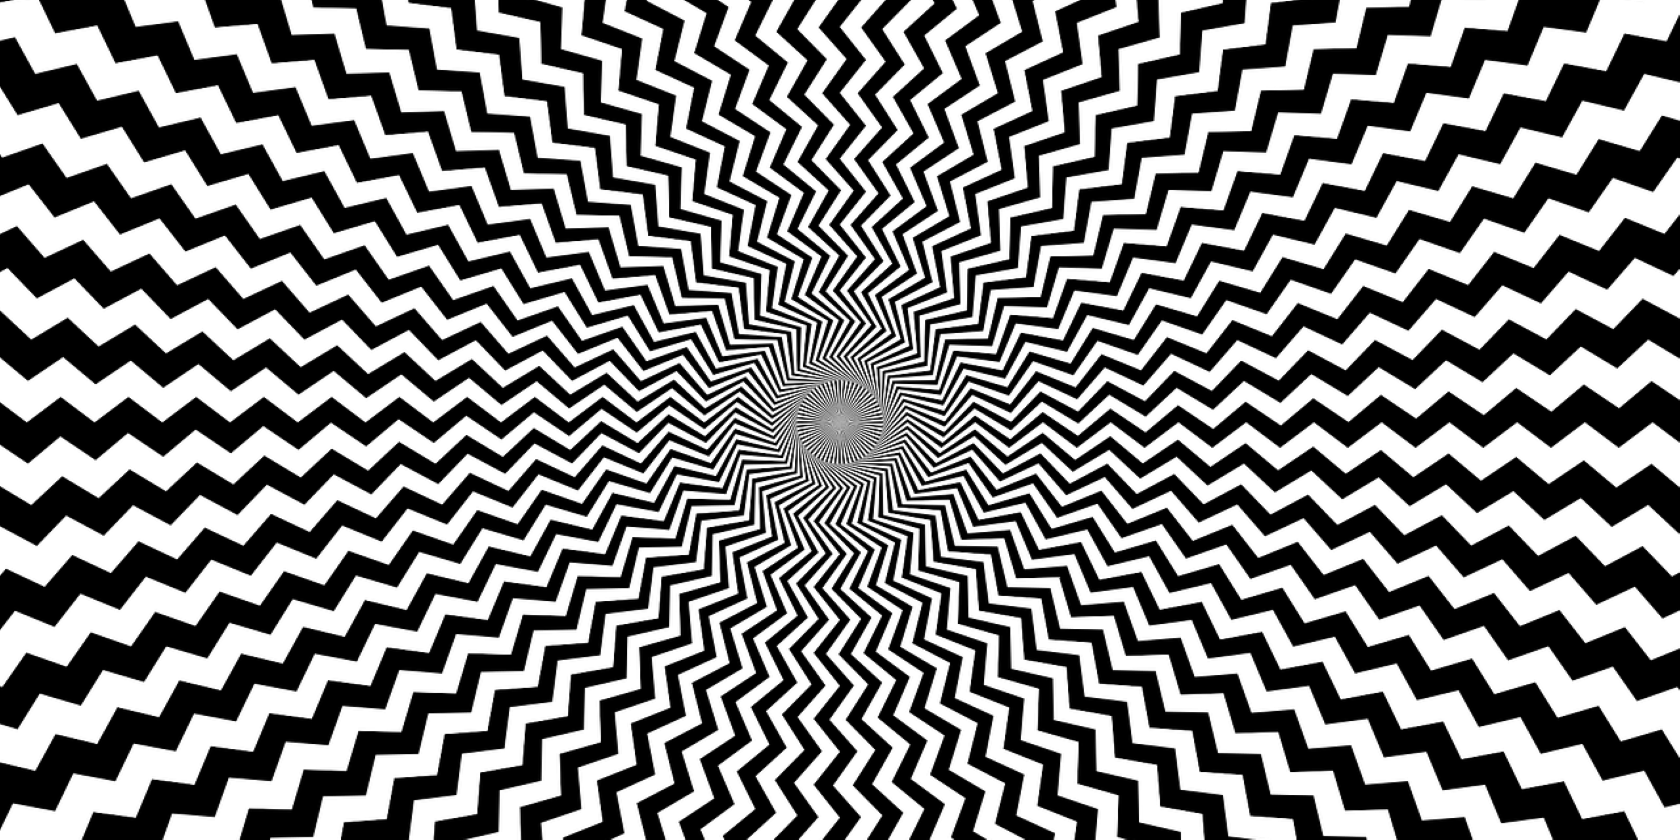 A black and white optical illusion that looks like the Sun.